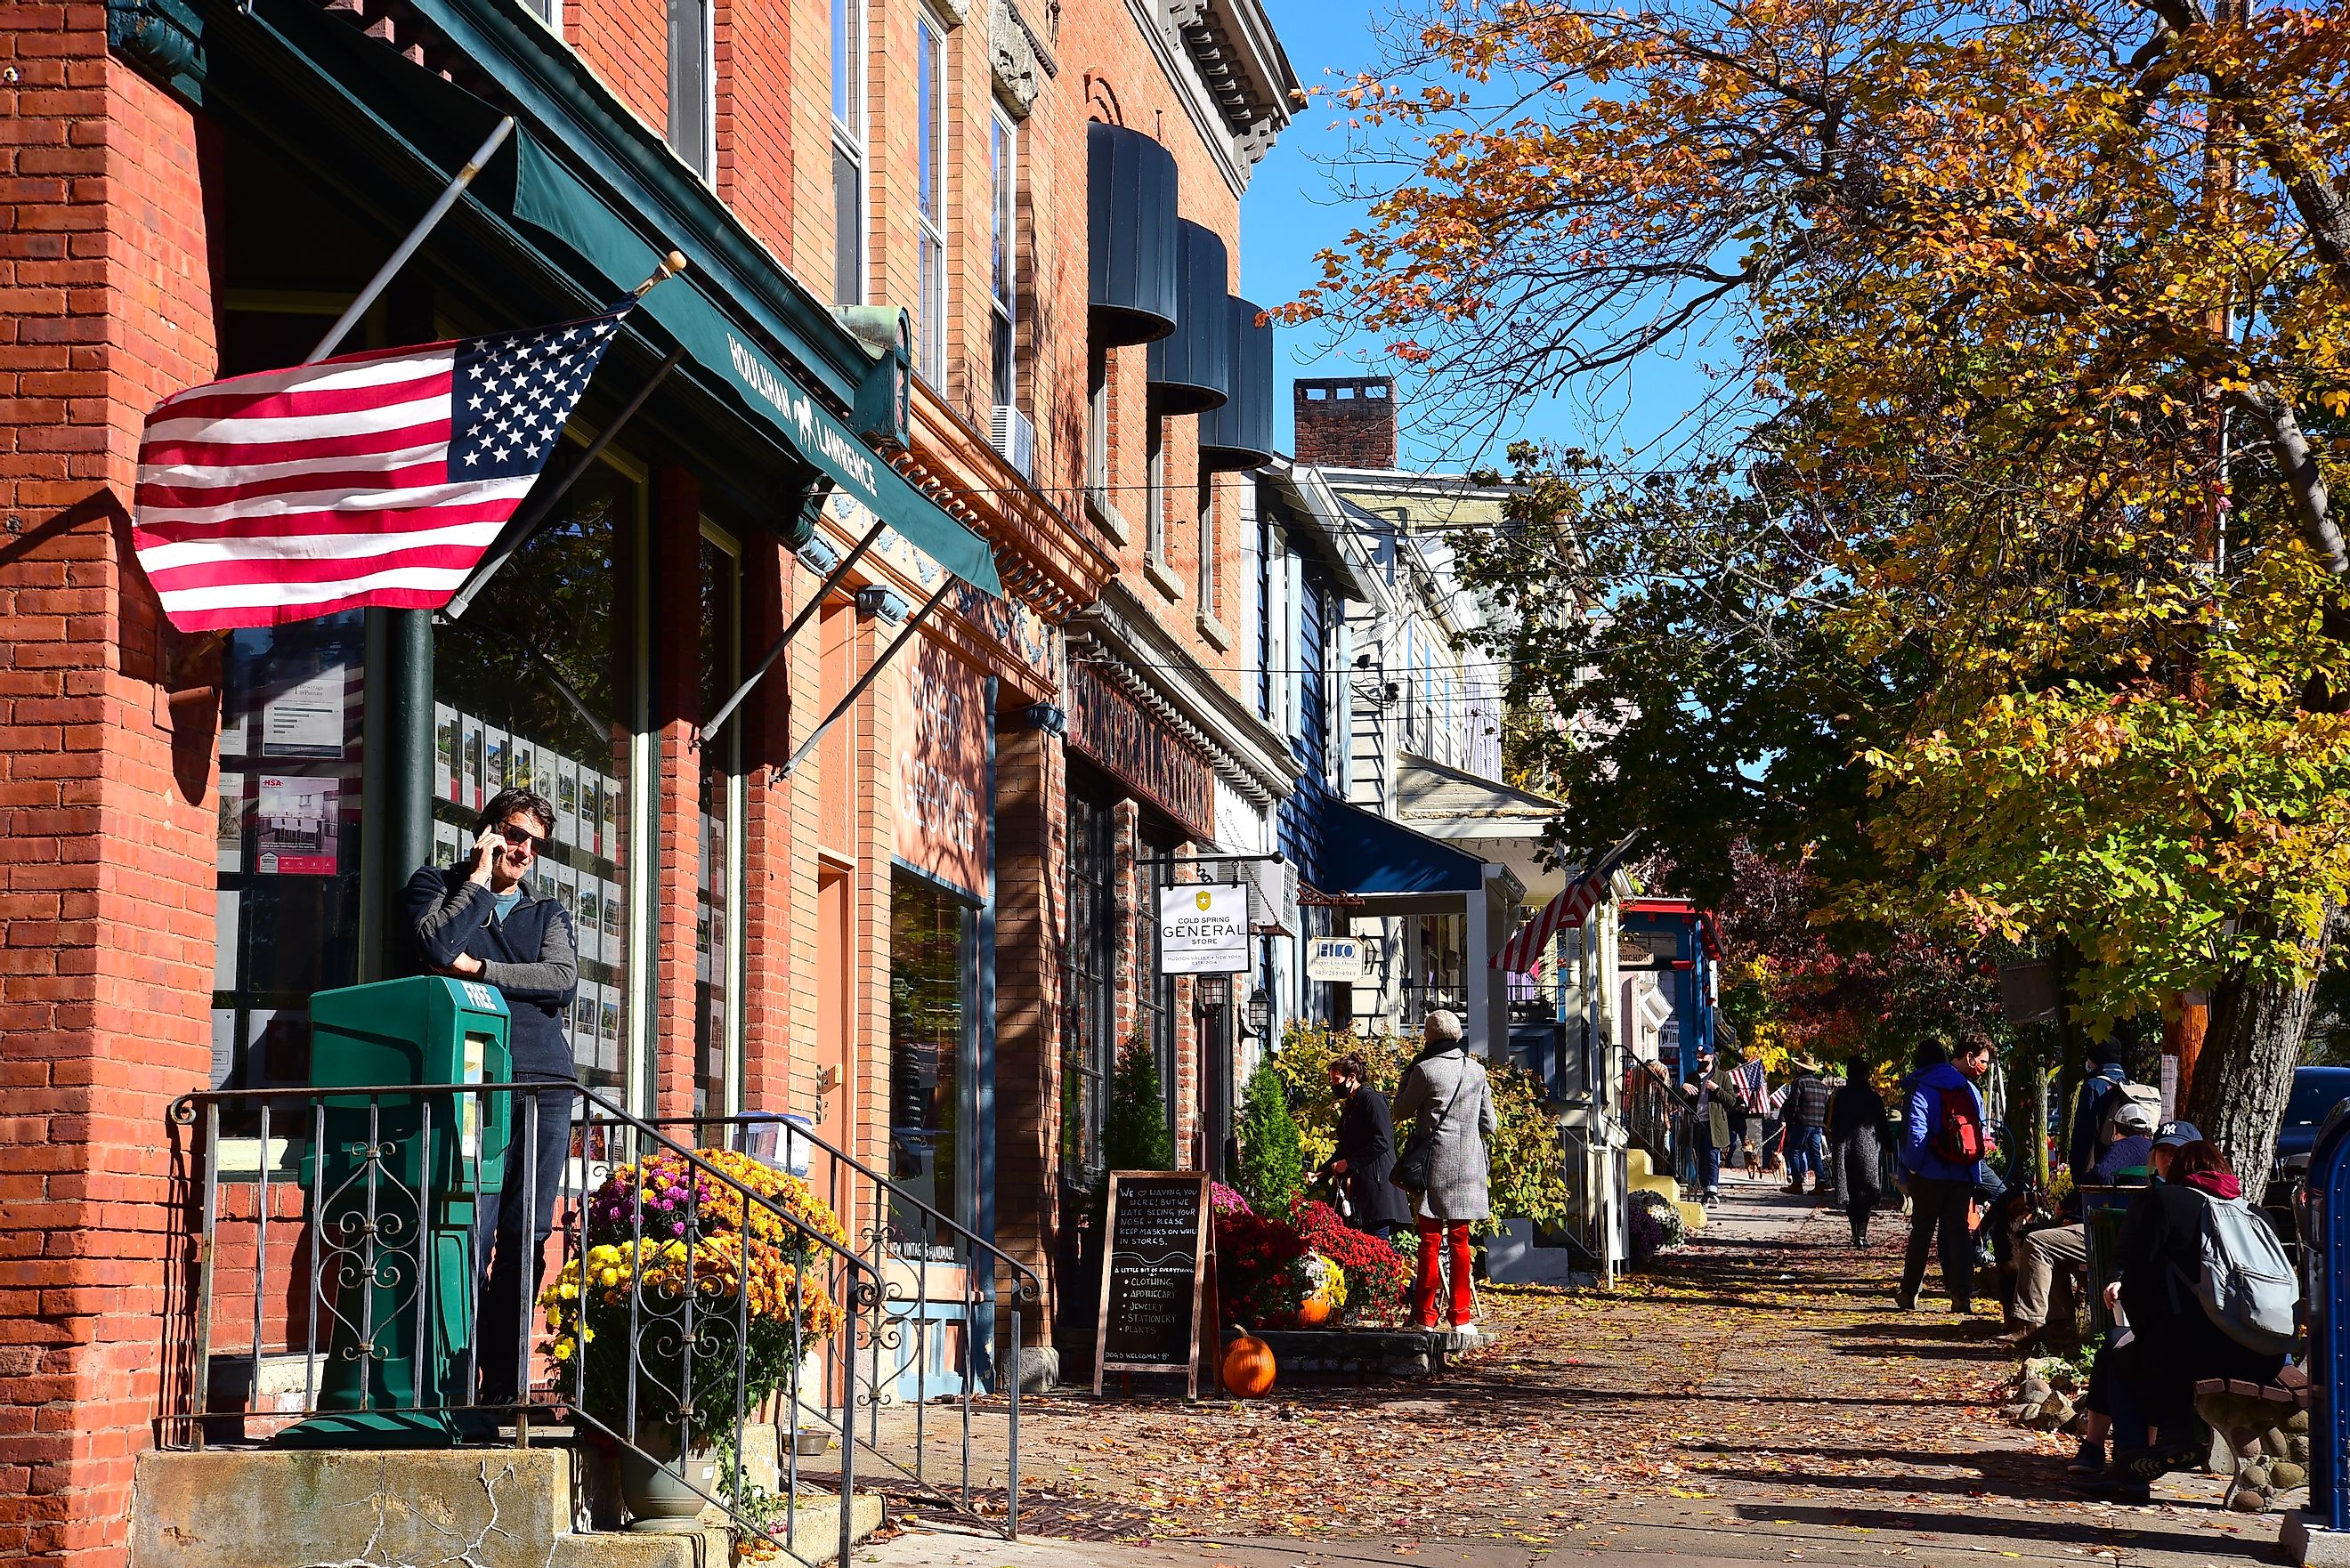 COLD SPRINGS, NEW YORK-OCTOBER 31, 2020: Sidewalk scene in Cold Springs, NY on a crisp Fall day.